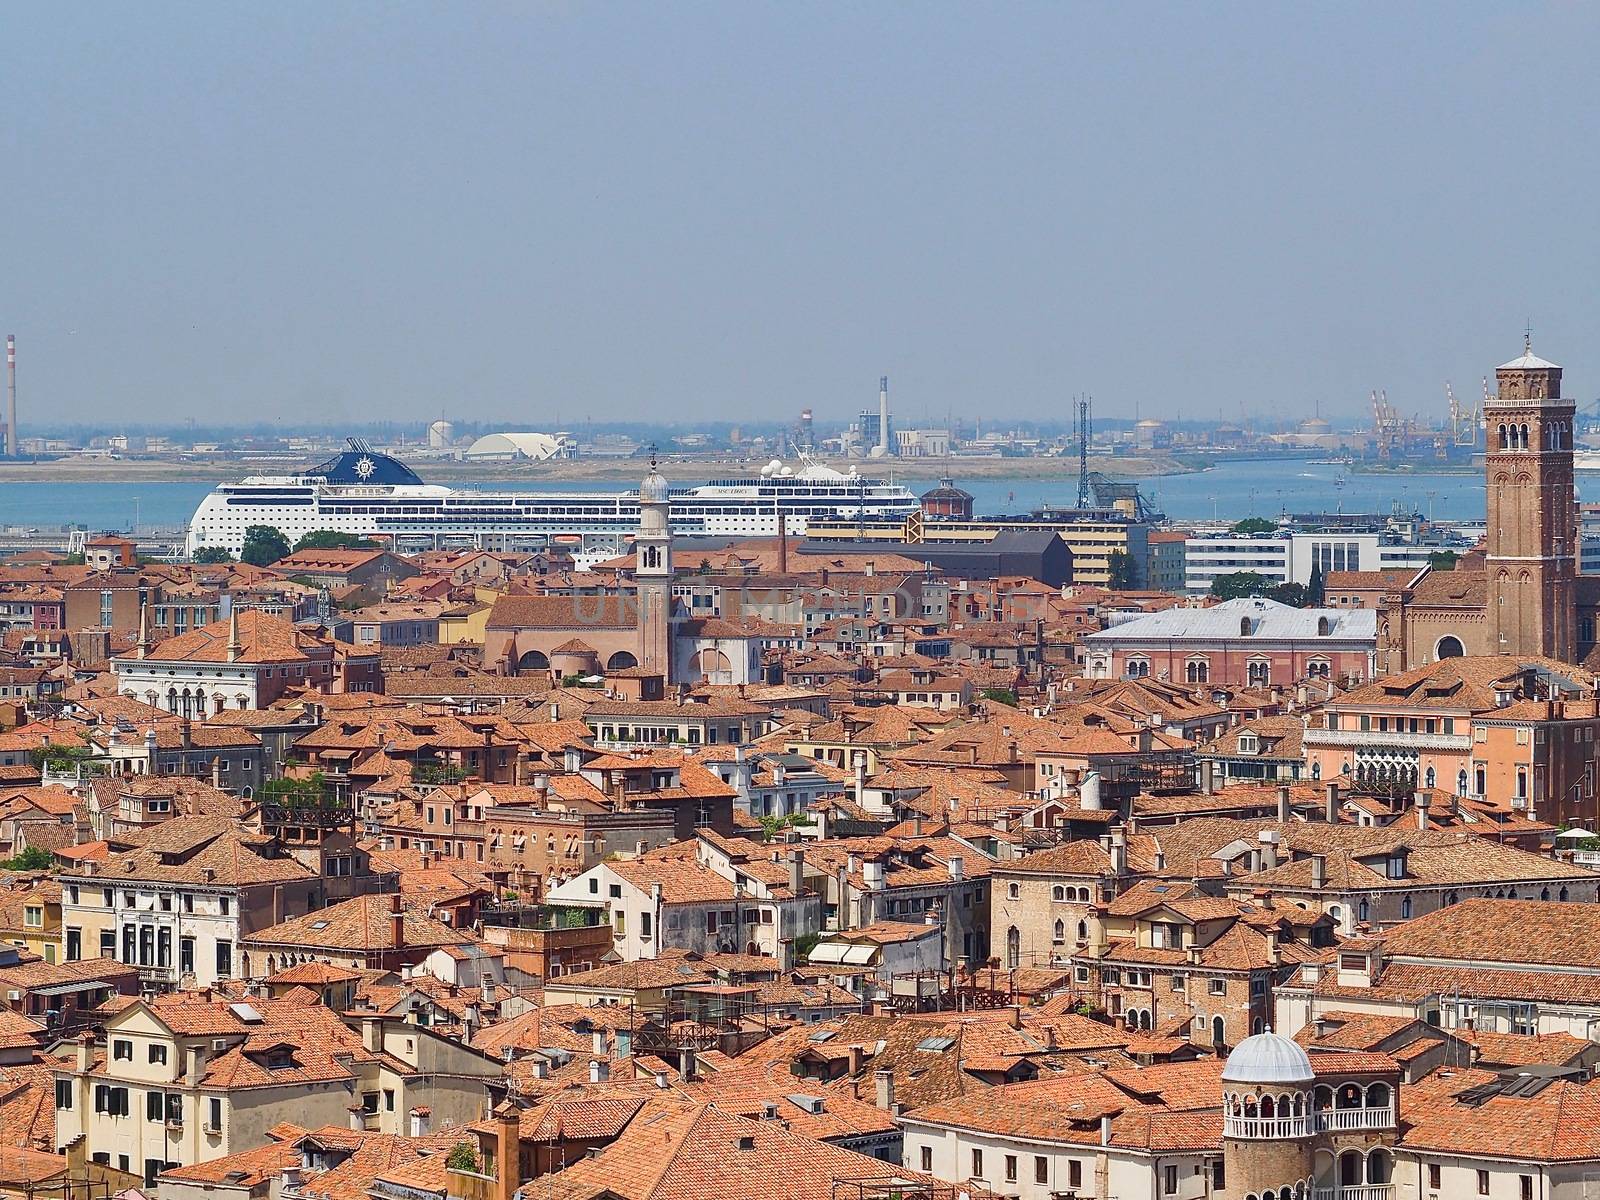 Looking over the red roofs of Venice from the Campanile in direction tower Santo Stefano